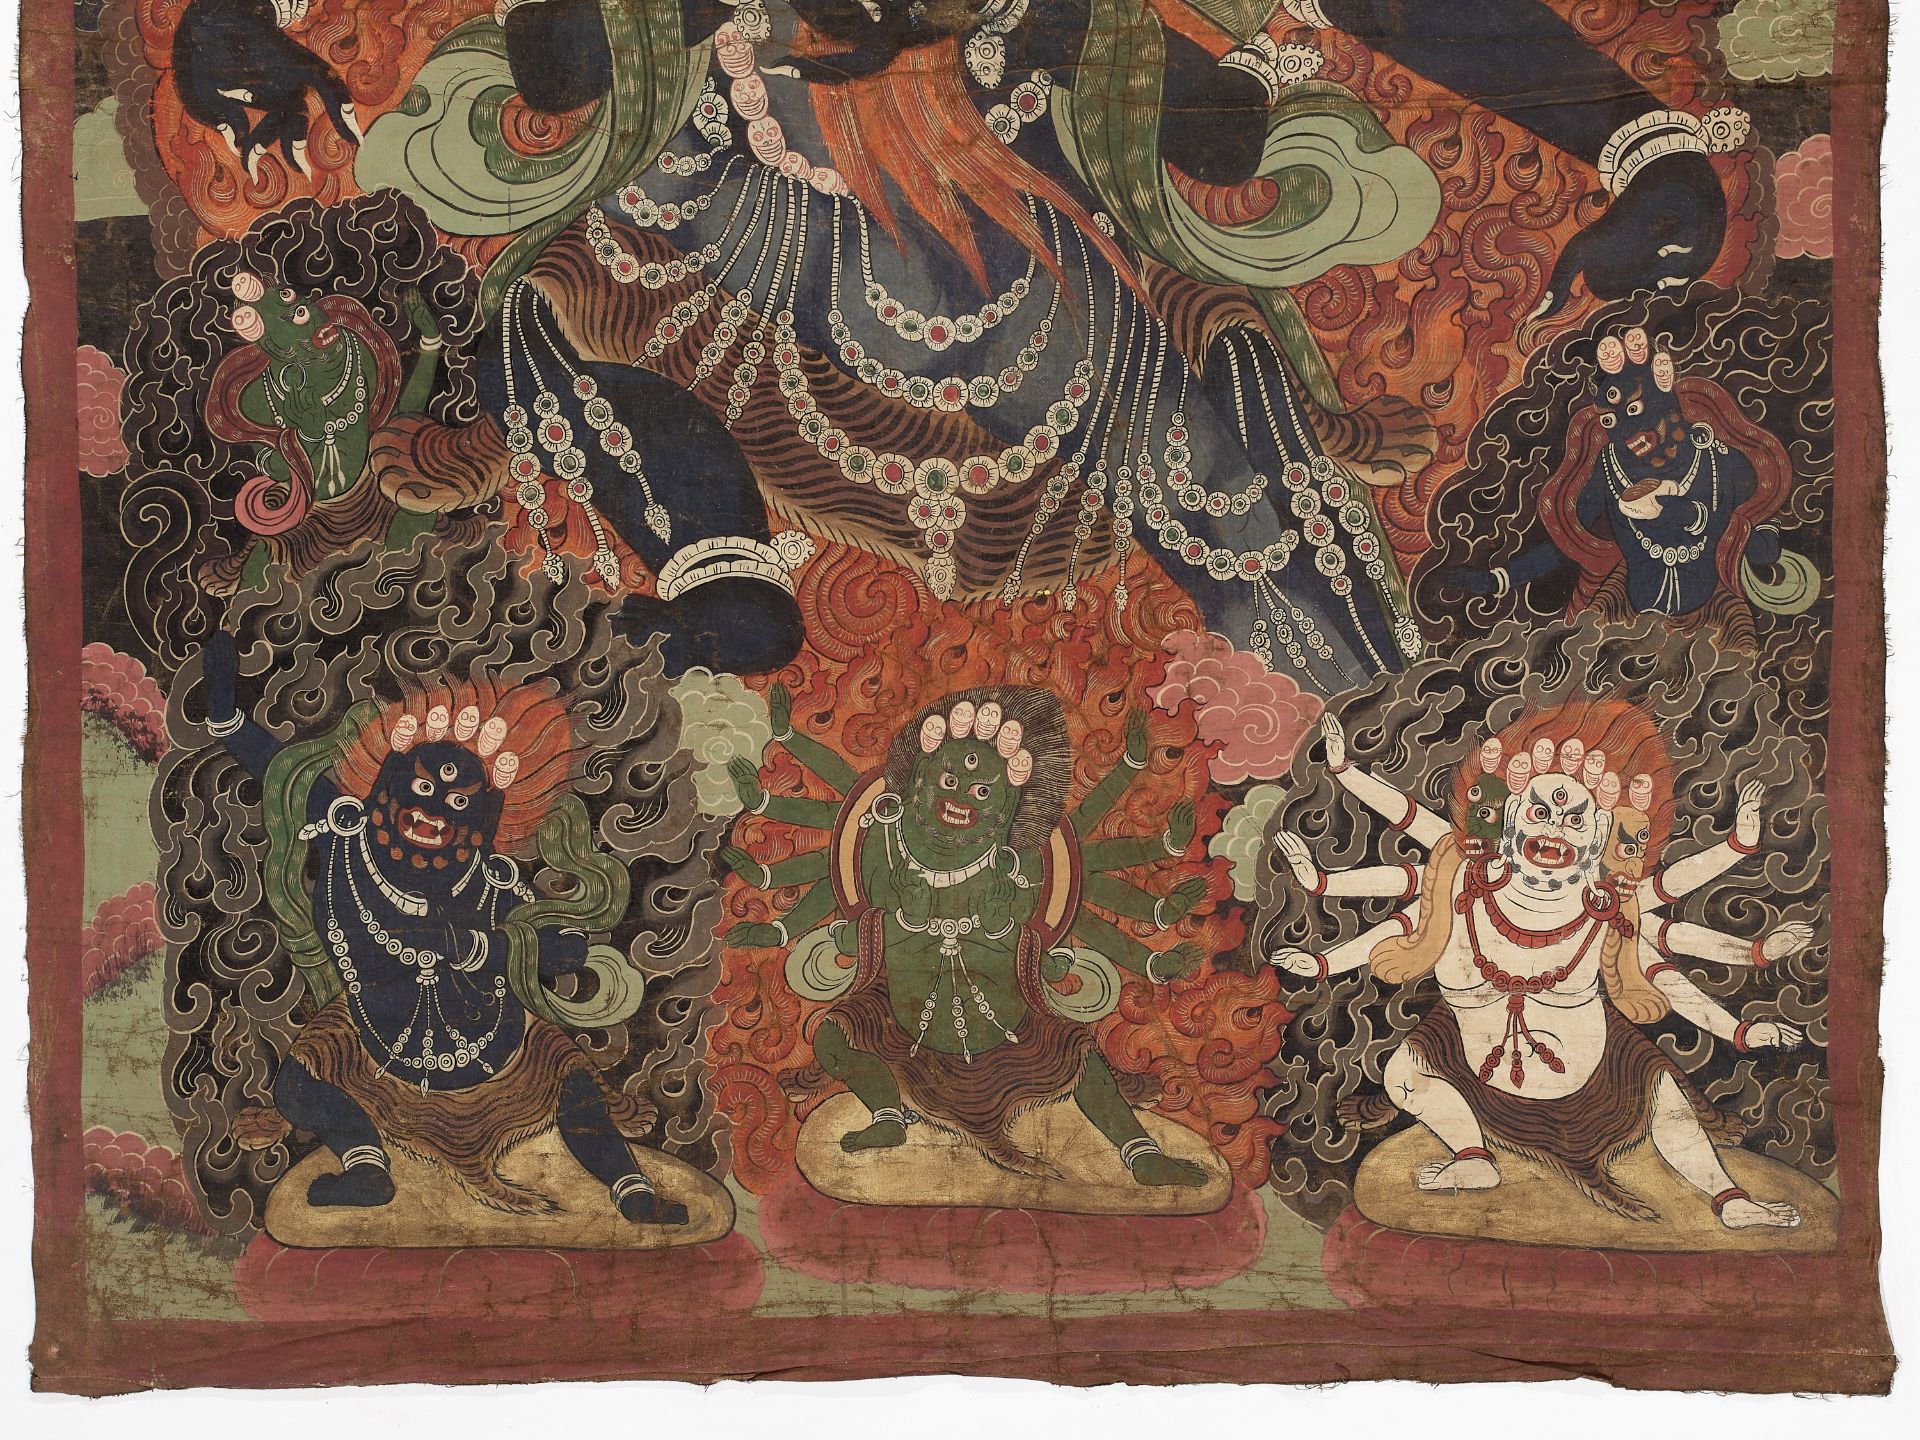 A VERY LARGE THANGKA OF A HERUKA AND CONSORT, TIBET, 18TH-19TH CENTURY - Image 6 of 7